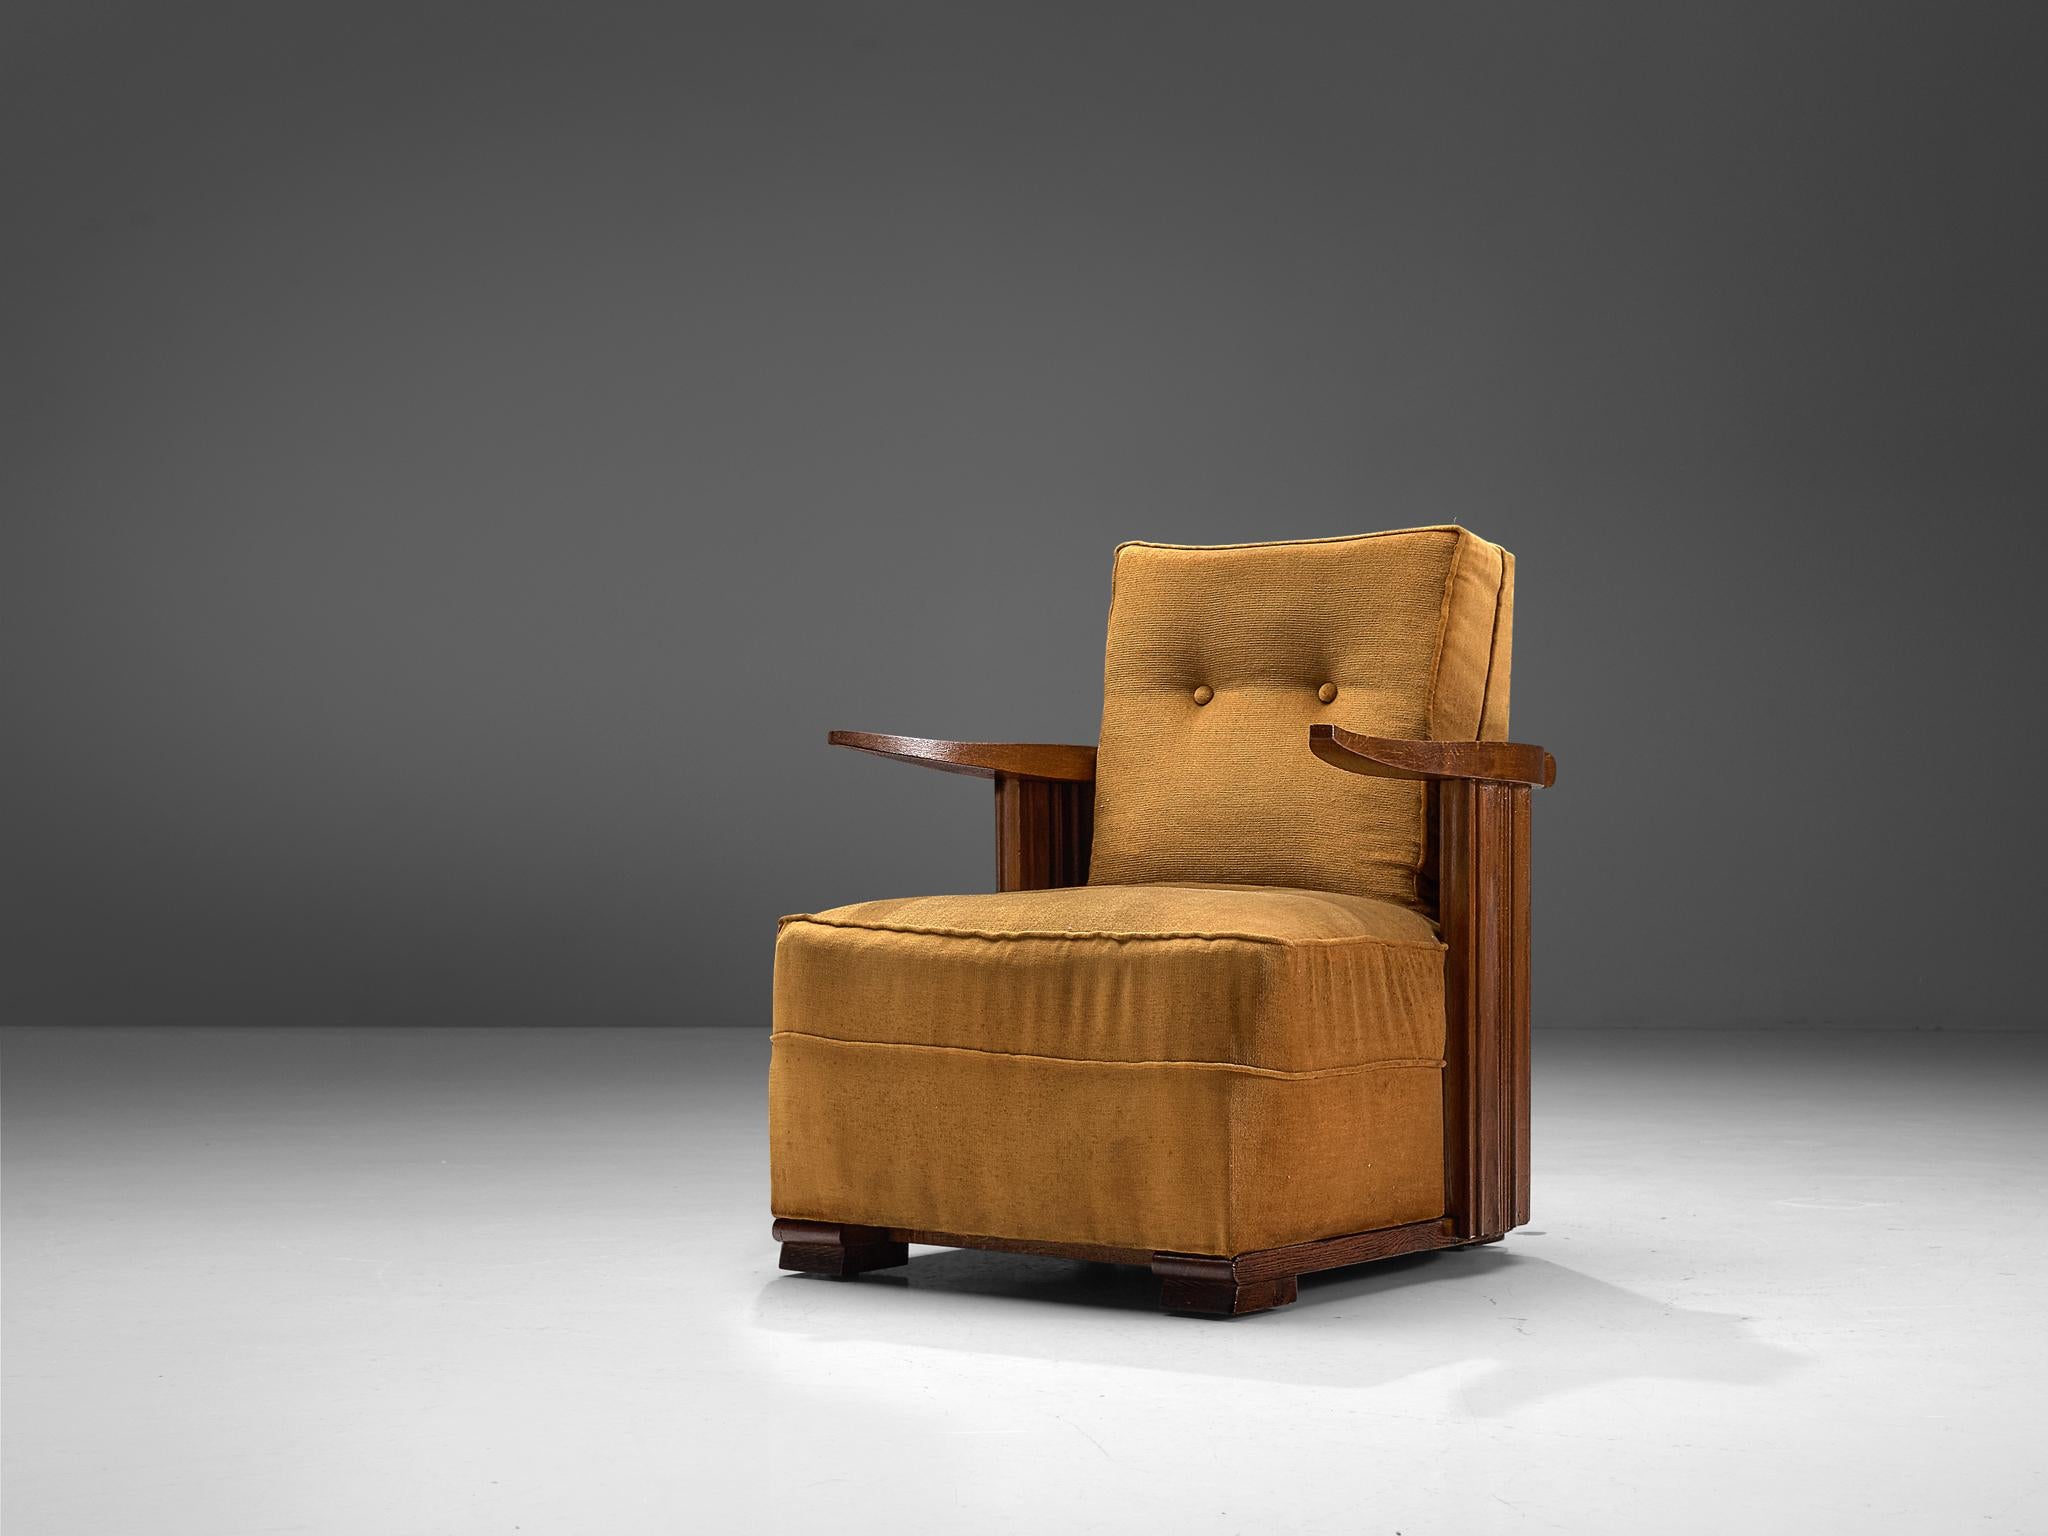 Lounge chair, oak and ocre velvet, France, 1930s

This unique design features cow horn-shaped armrests, thick cushions and carved, closed, striped sides. The legs consists of two horizontal, flat oak carved pieces of oak. Providing this set with a